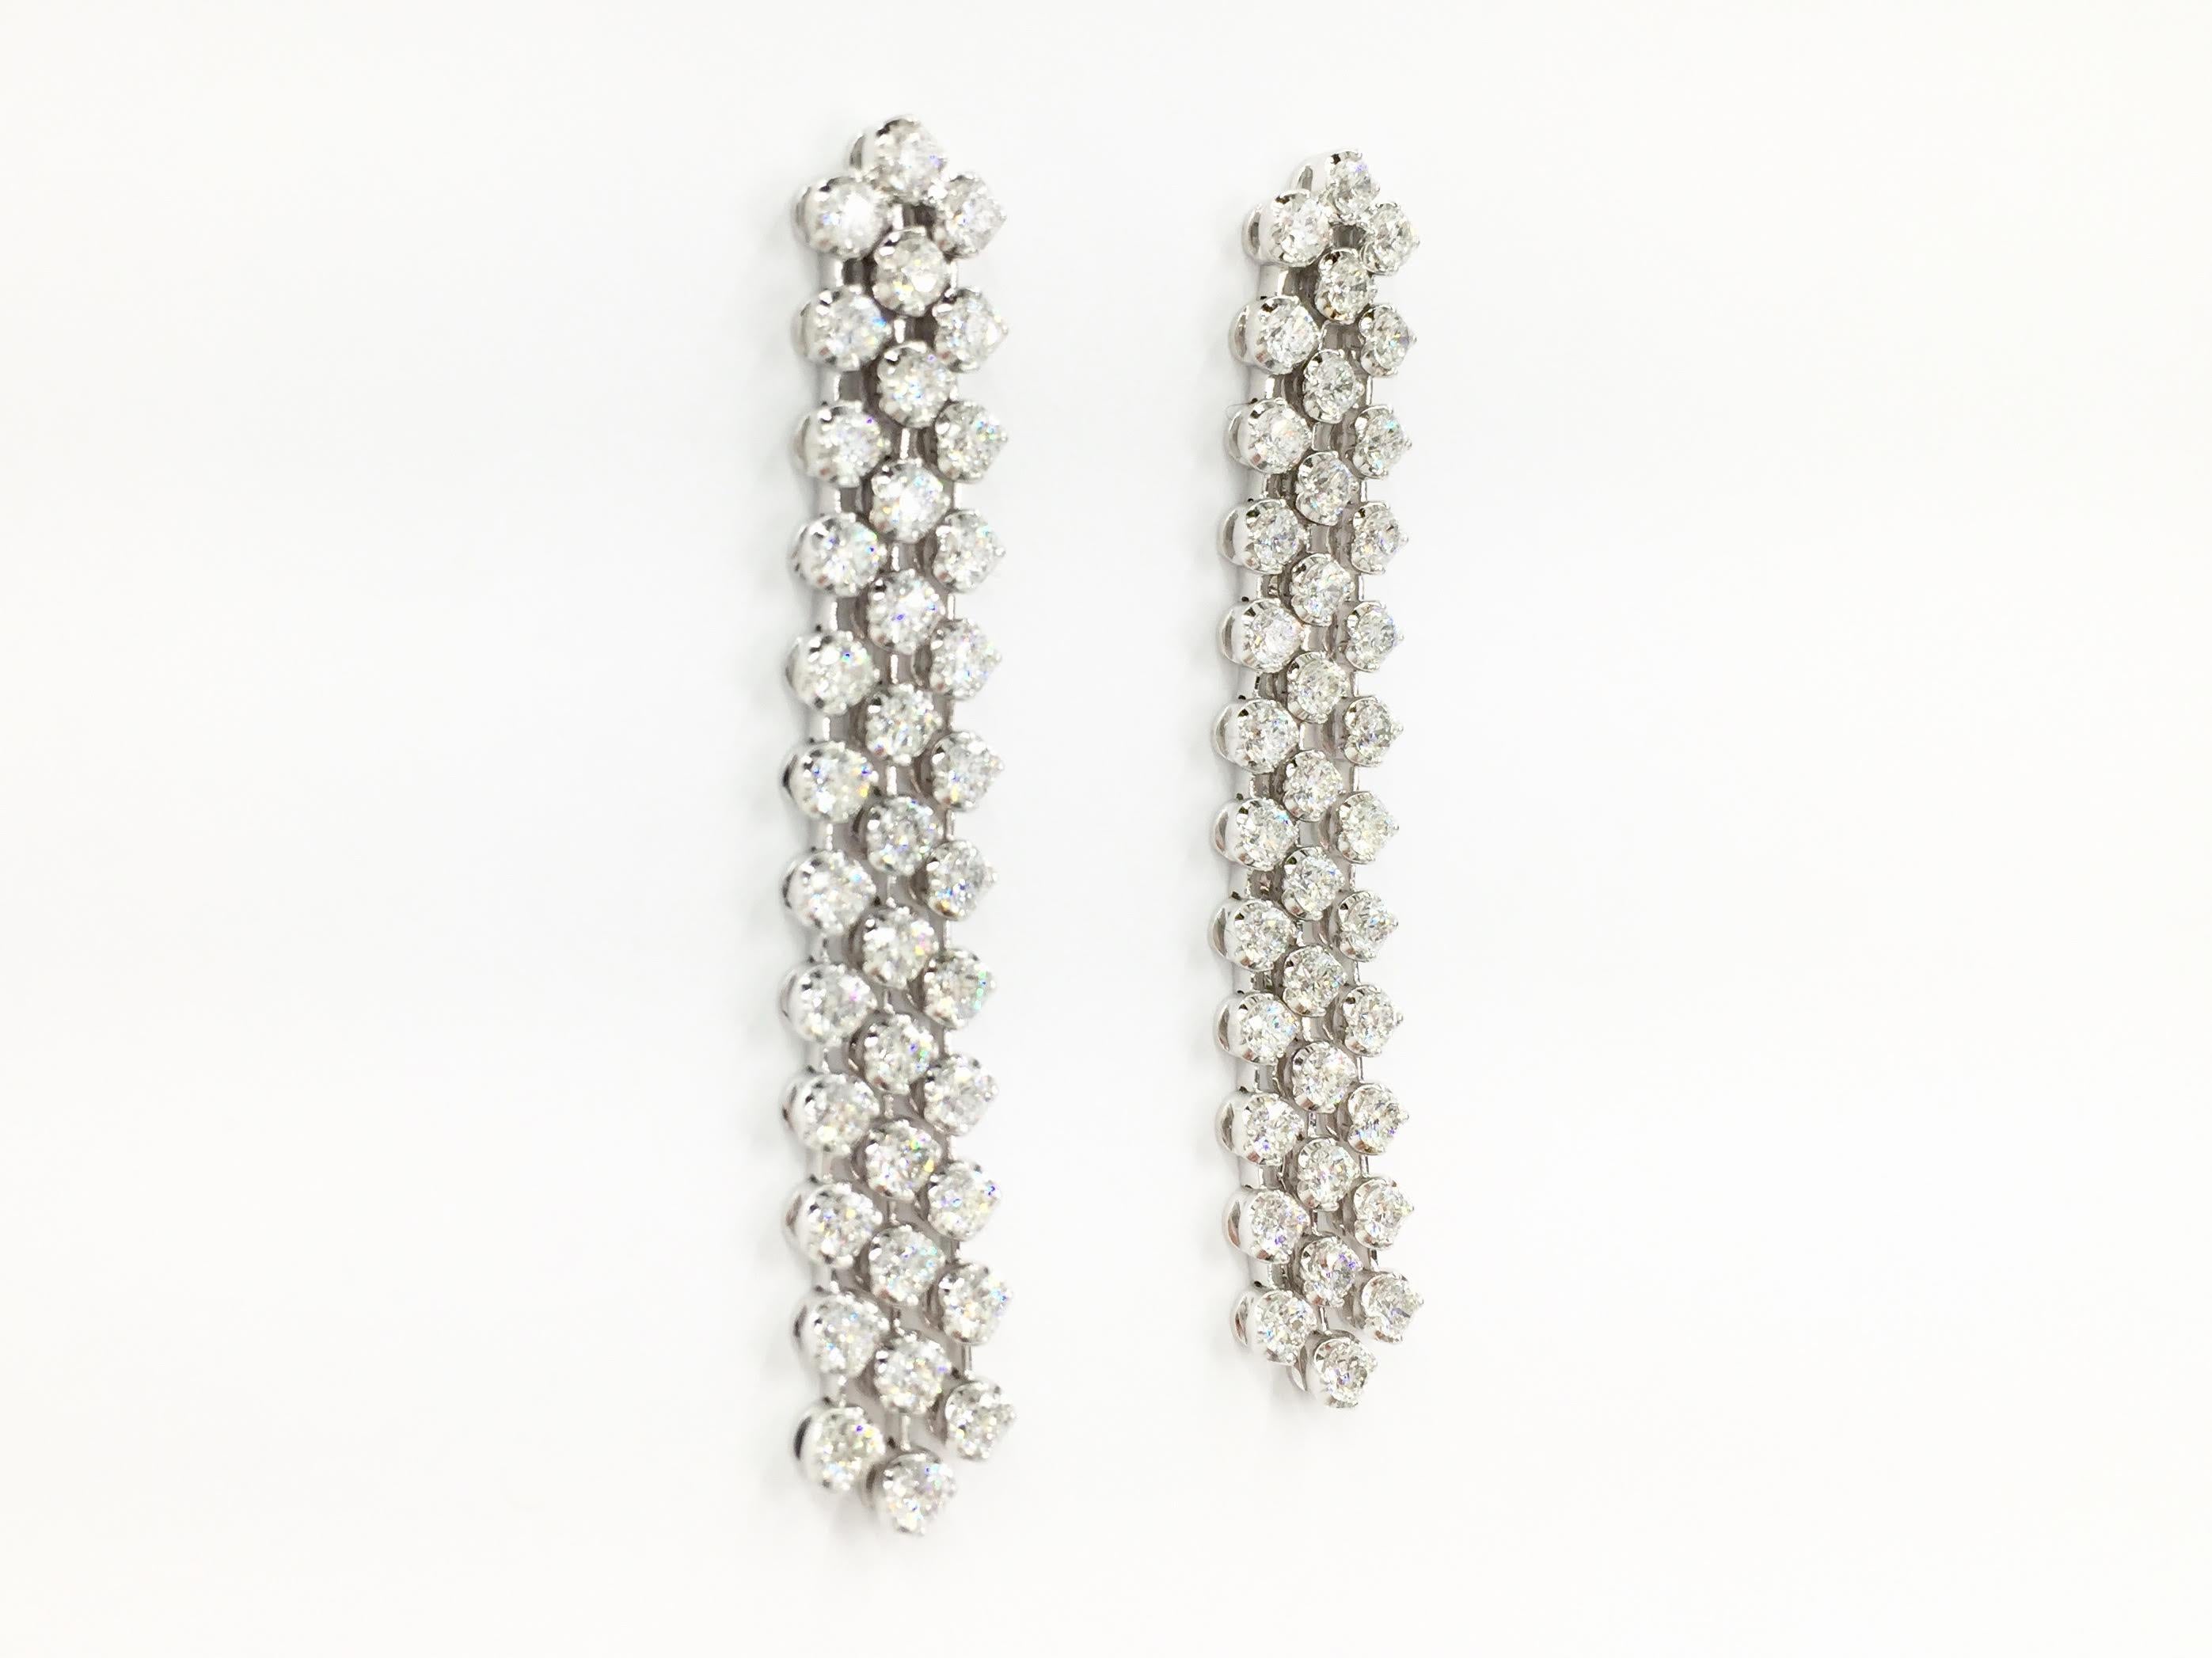 4.34 carats of round brilliant diamonds are stationed beautifully on these modern cascading three strand 18 karat white gold earrings. Earrings have excellent movement, allowing a constant sparkle. Diamond quality is approximately G color, VS2